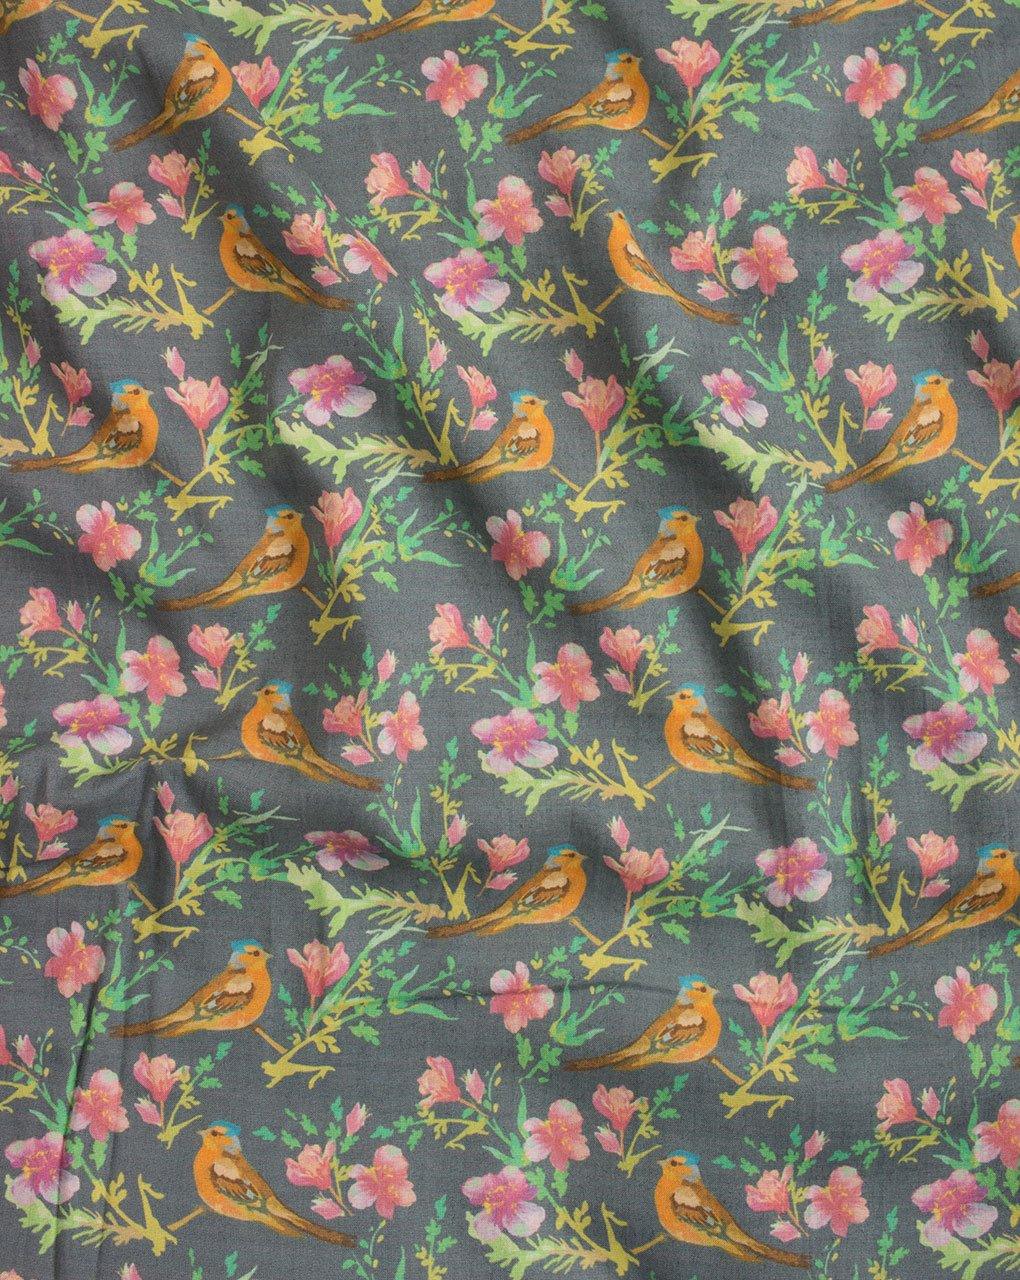 ( Pre-Cut 1.5 MTR ) Floral Digital Print Certified Antimicrobial Rayon Fabric - Fabriclore.com